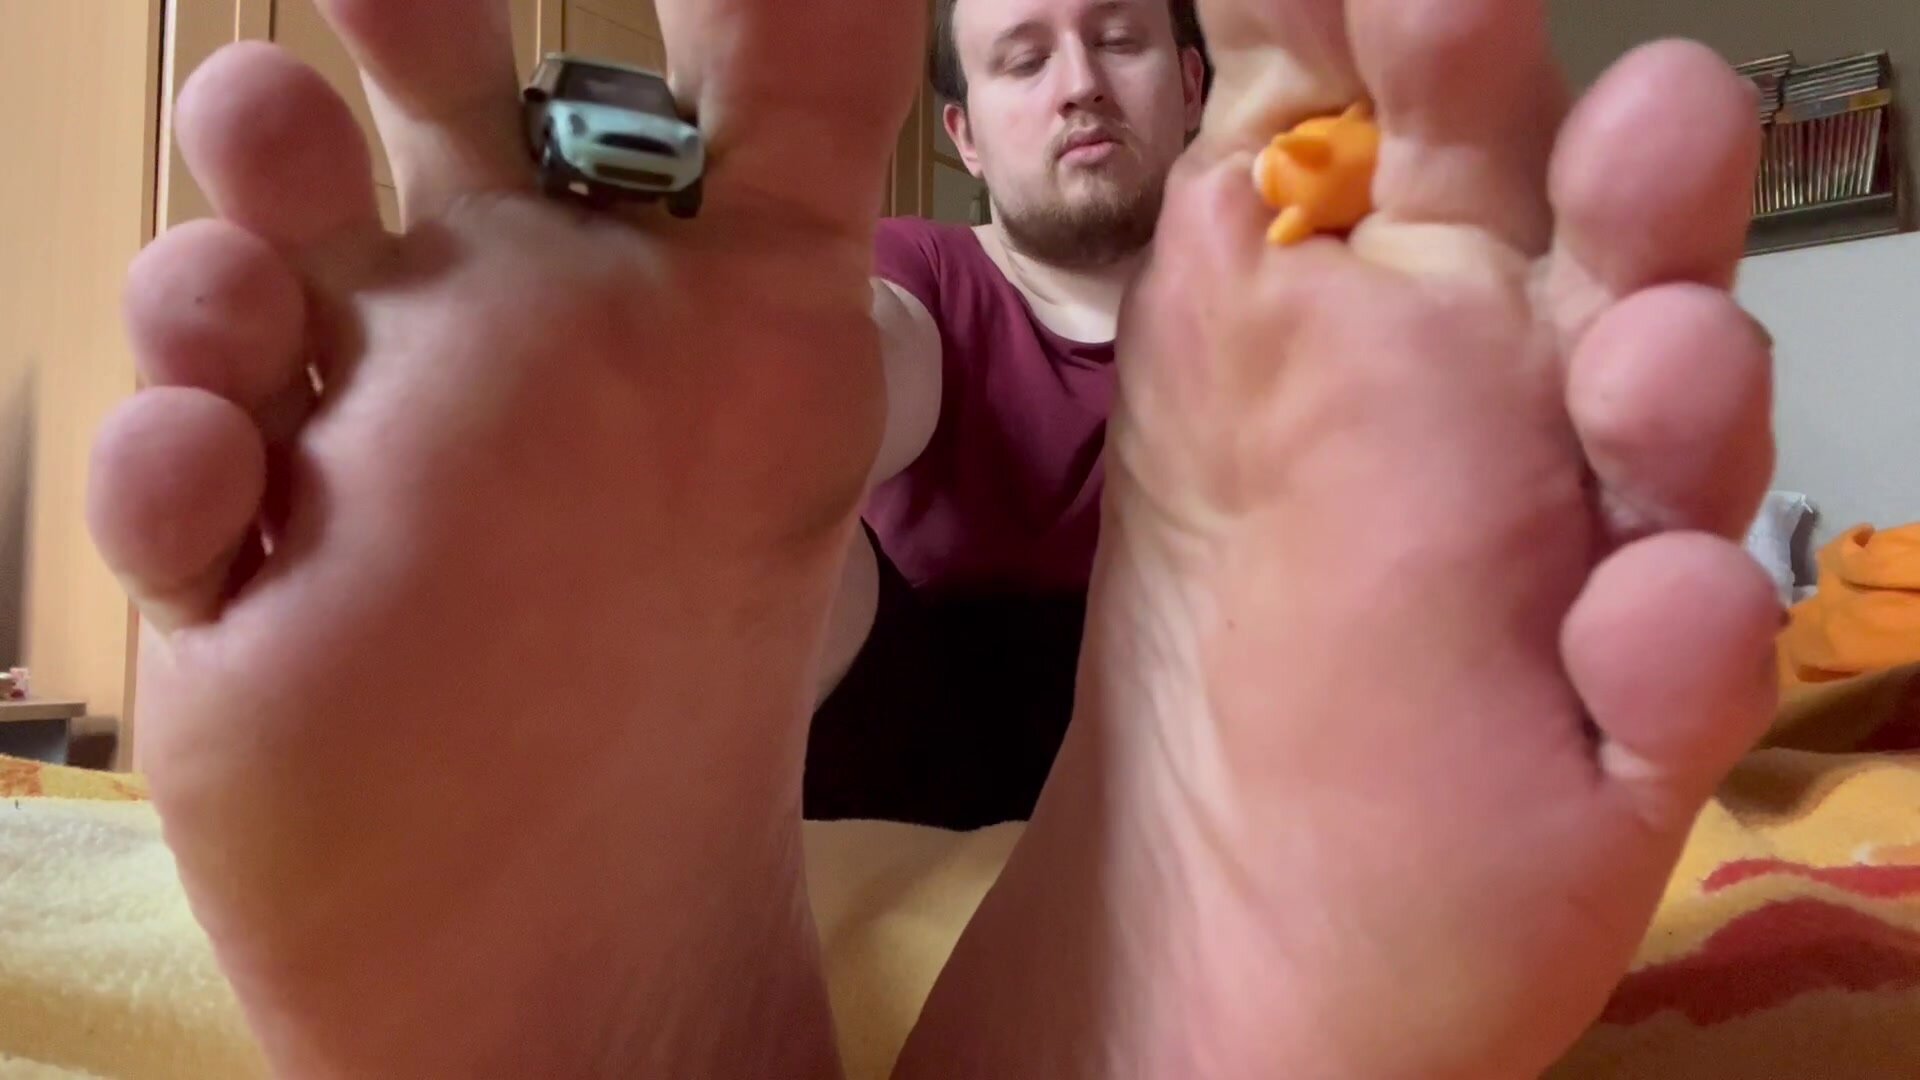 You insects need to worship my sweaty feet